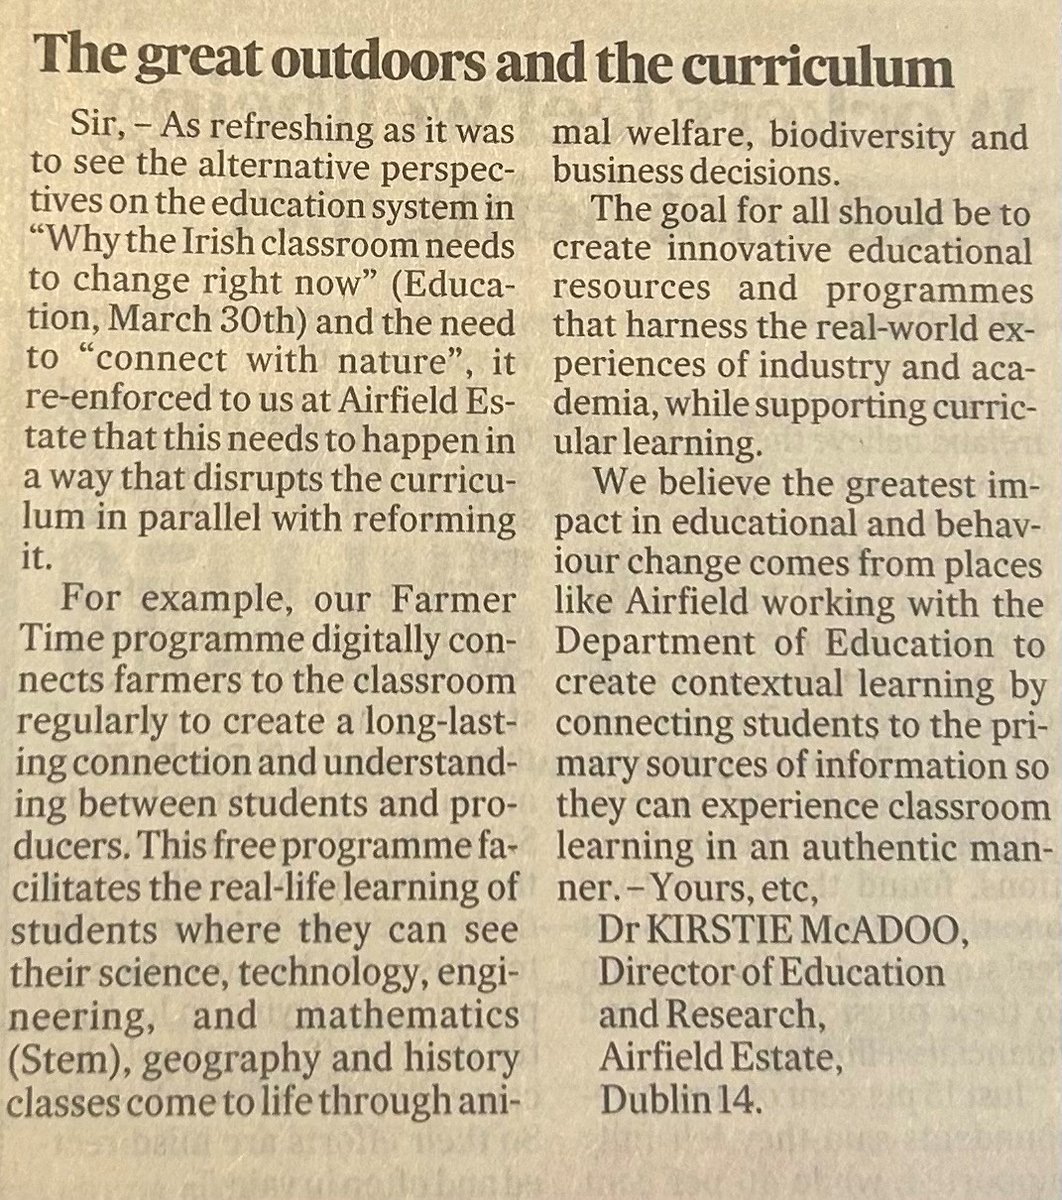 Take a look at @kirstiemcadoo, our Director of Education and Research's letter in today's @IrishTimes following its article about 'why the Irish classroom needs to change'. You can read the interesting viewpoint on future-proofing the education system here lnkd.in/e7cJbhz5